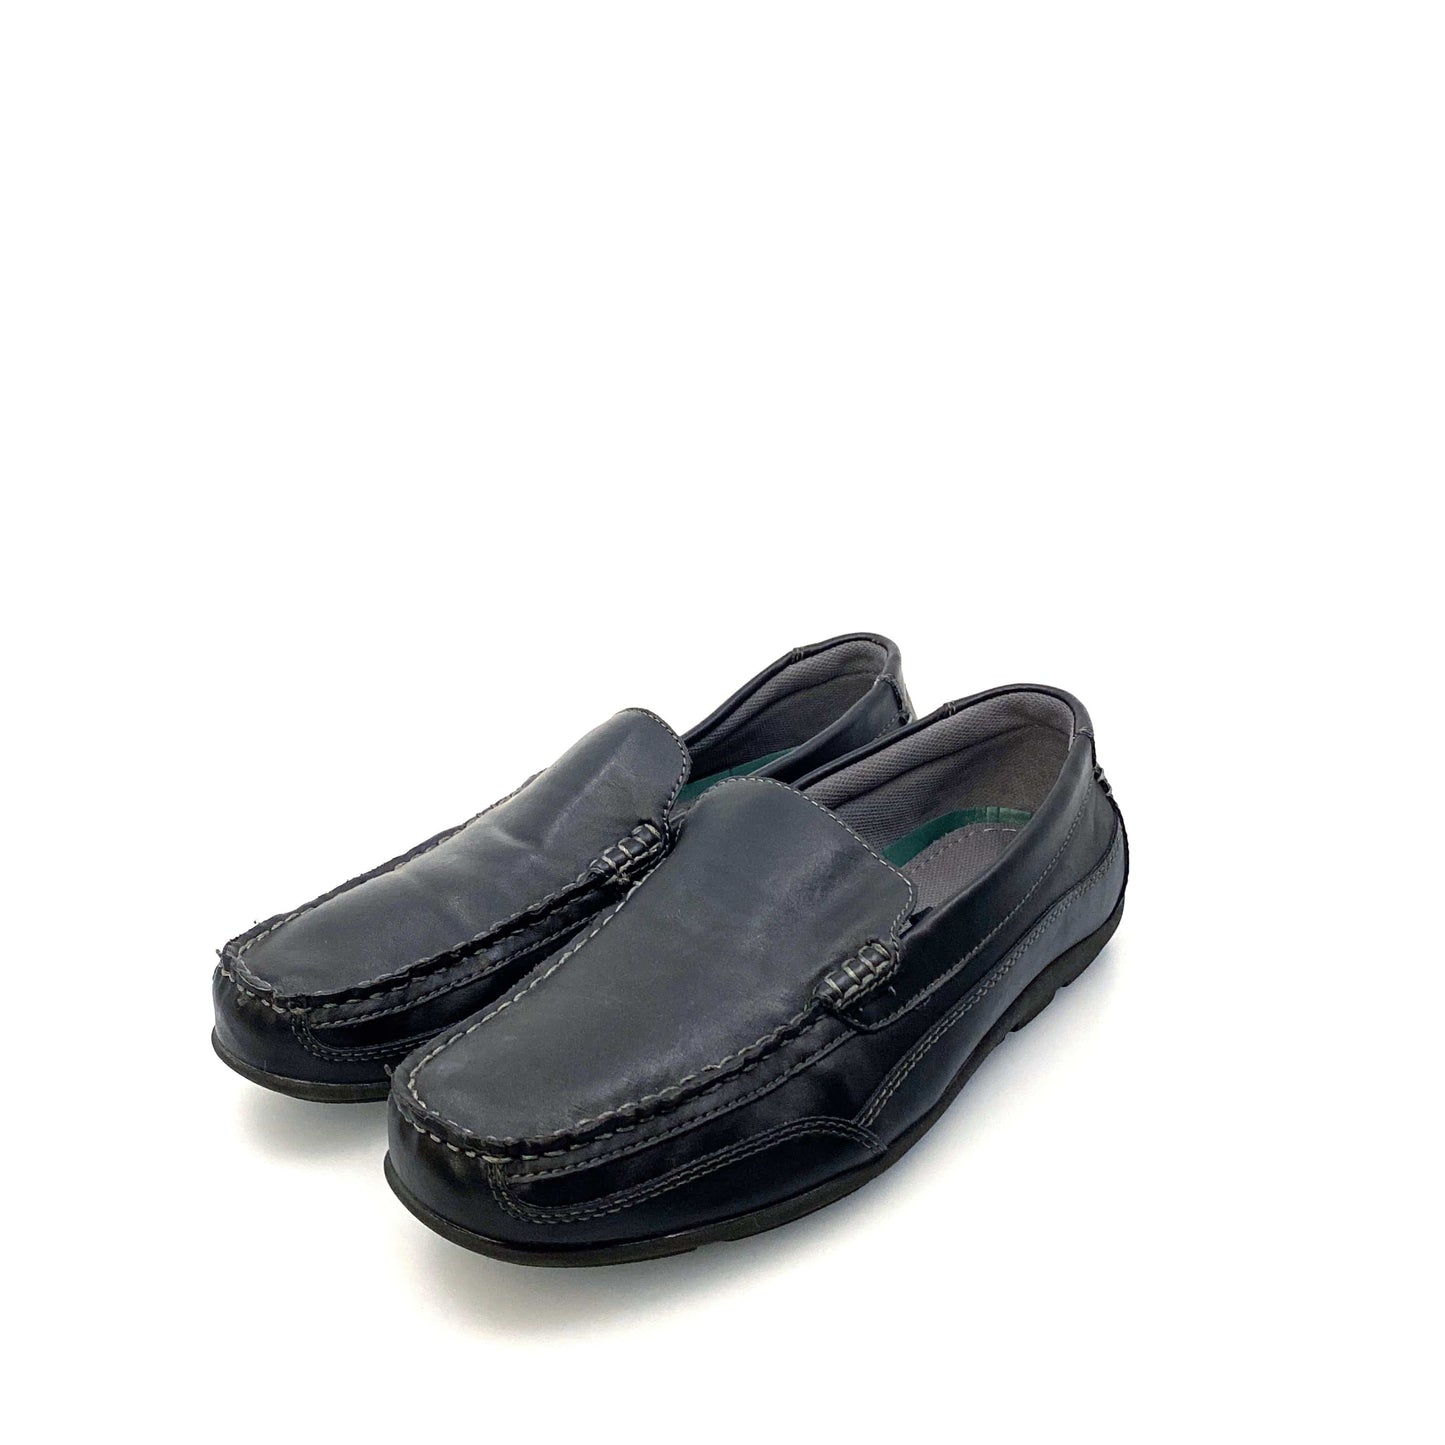 Thom McAn Kendrick 2 Mens Size 9M Black Slip-On Driving Loafer Shoes Pre-Owned